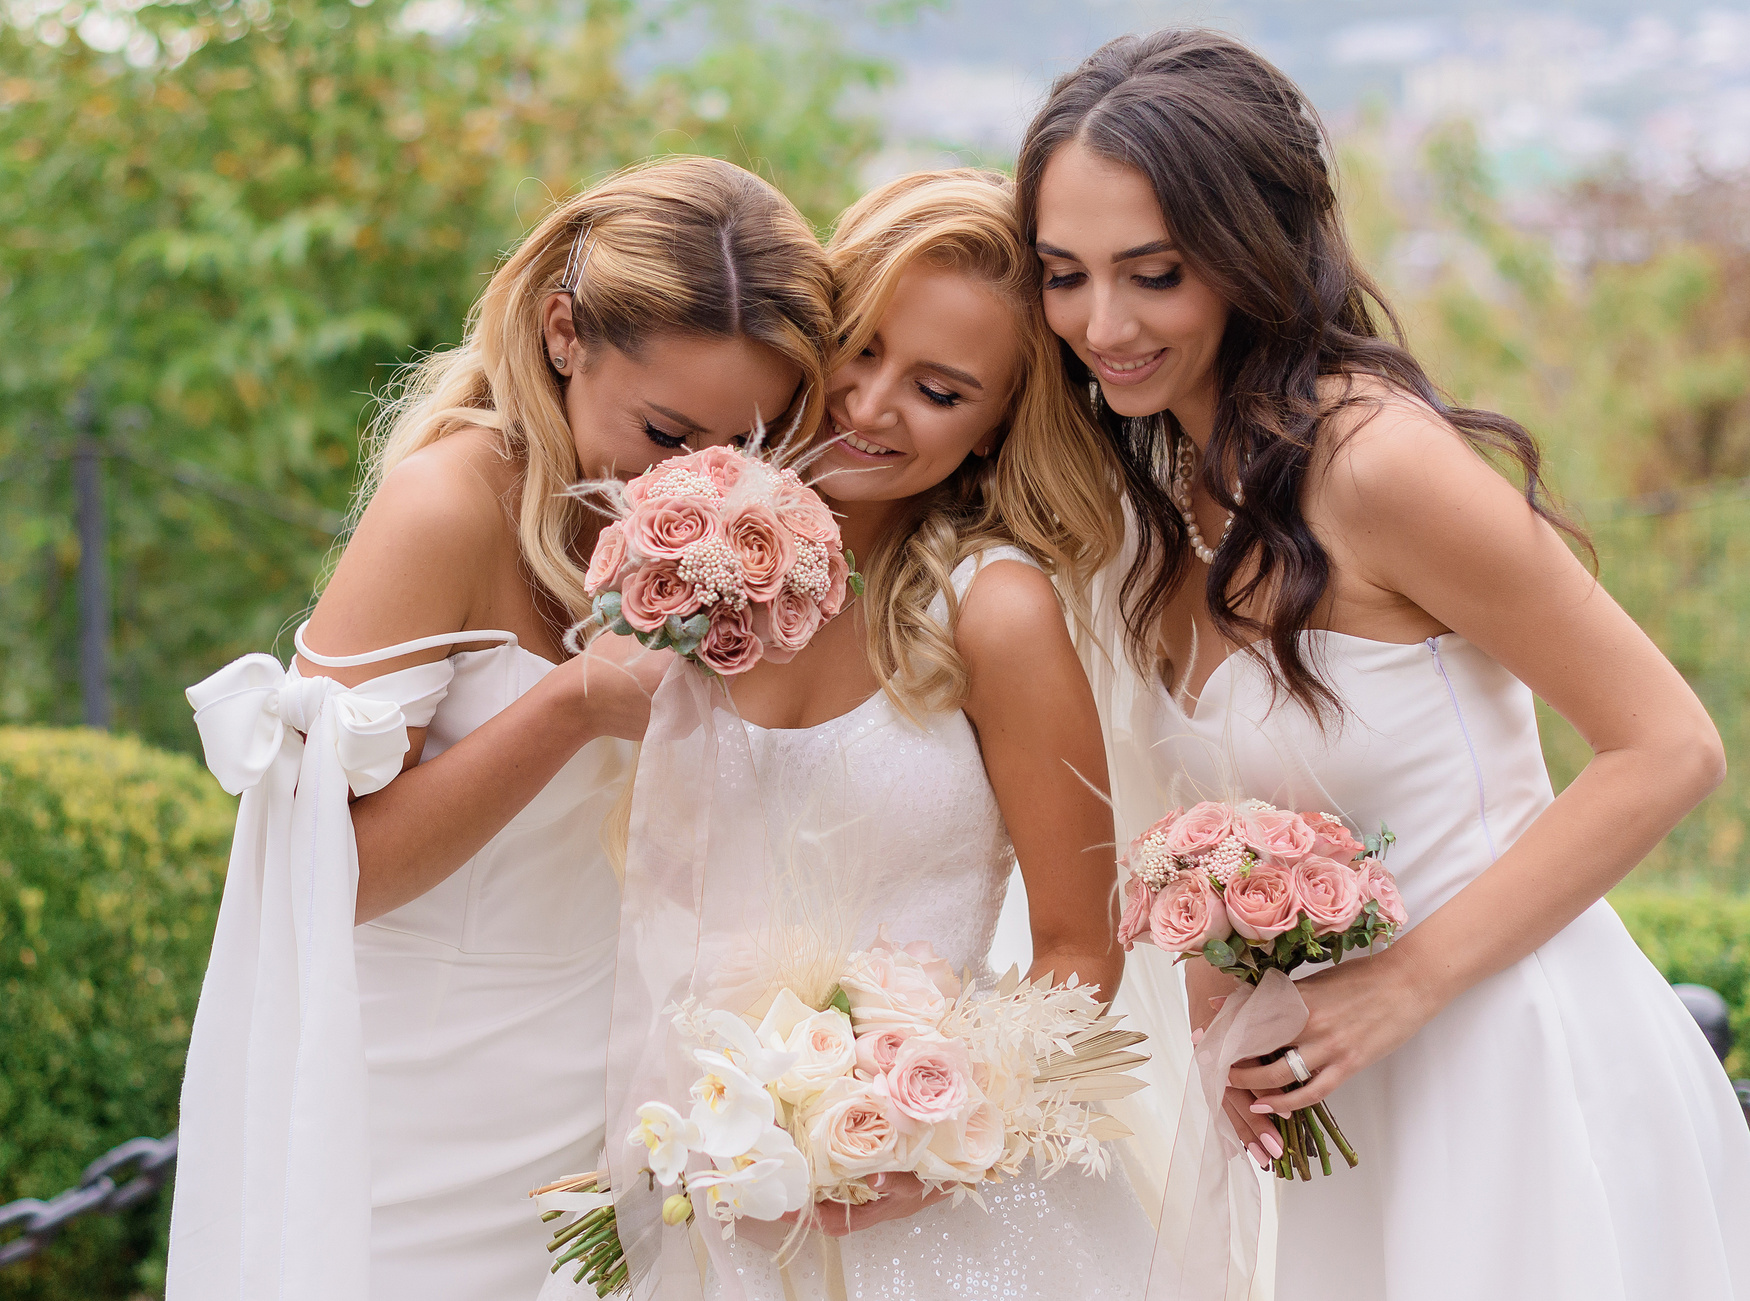 Portrait of Bride with Her Bridesmaids 